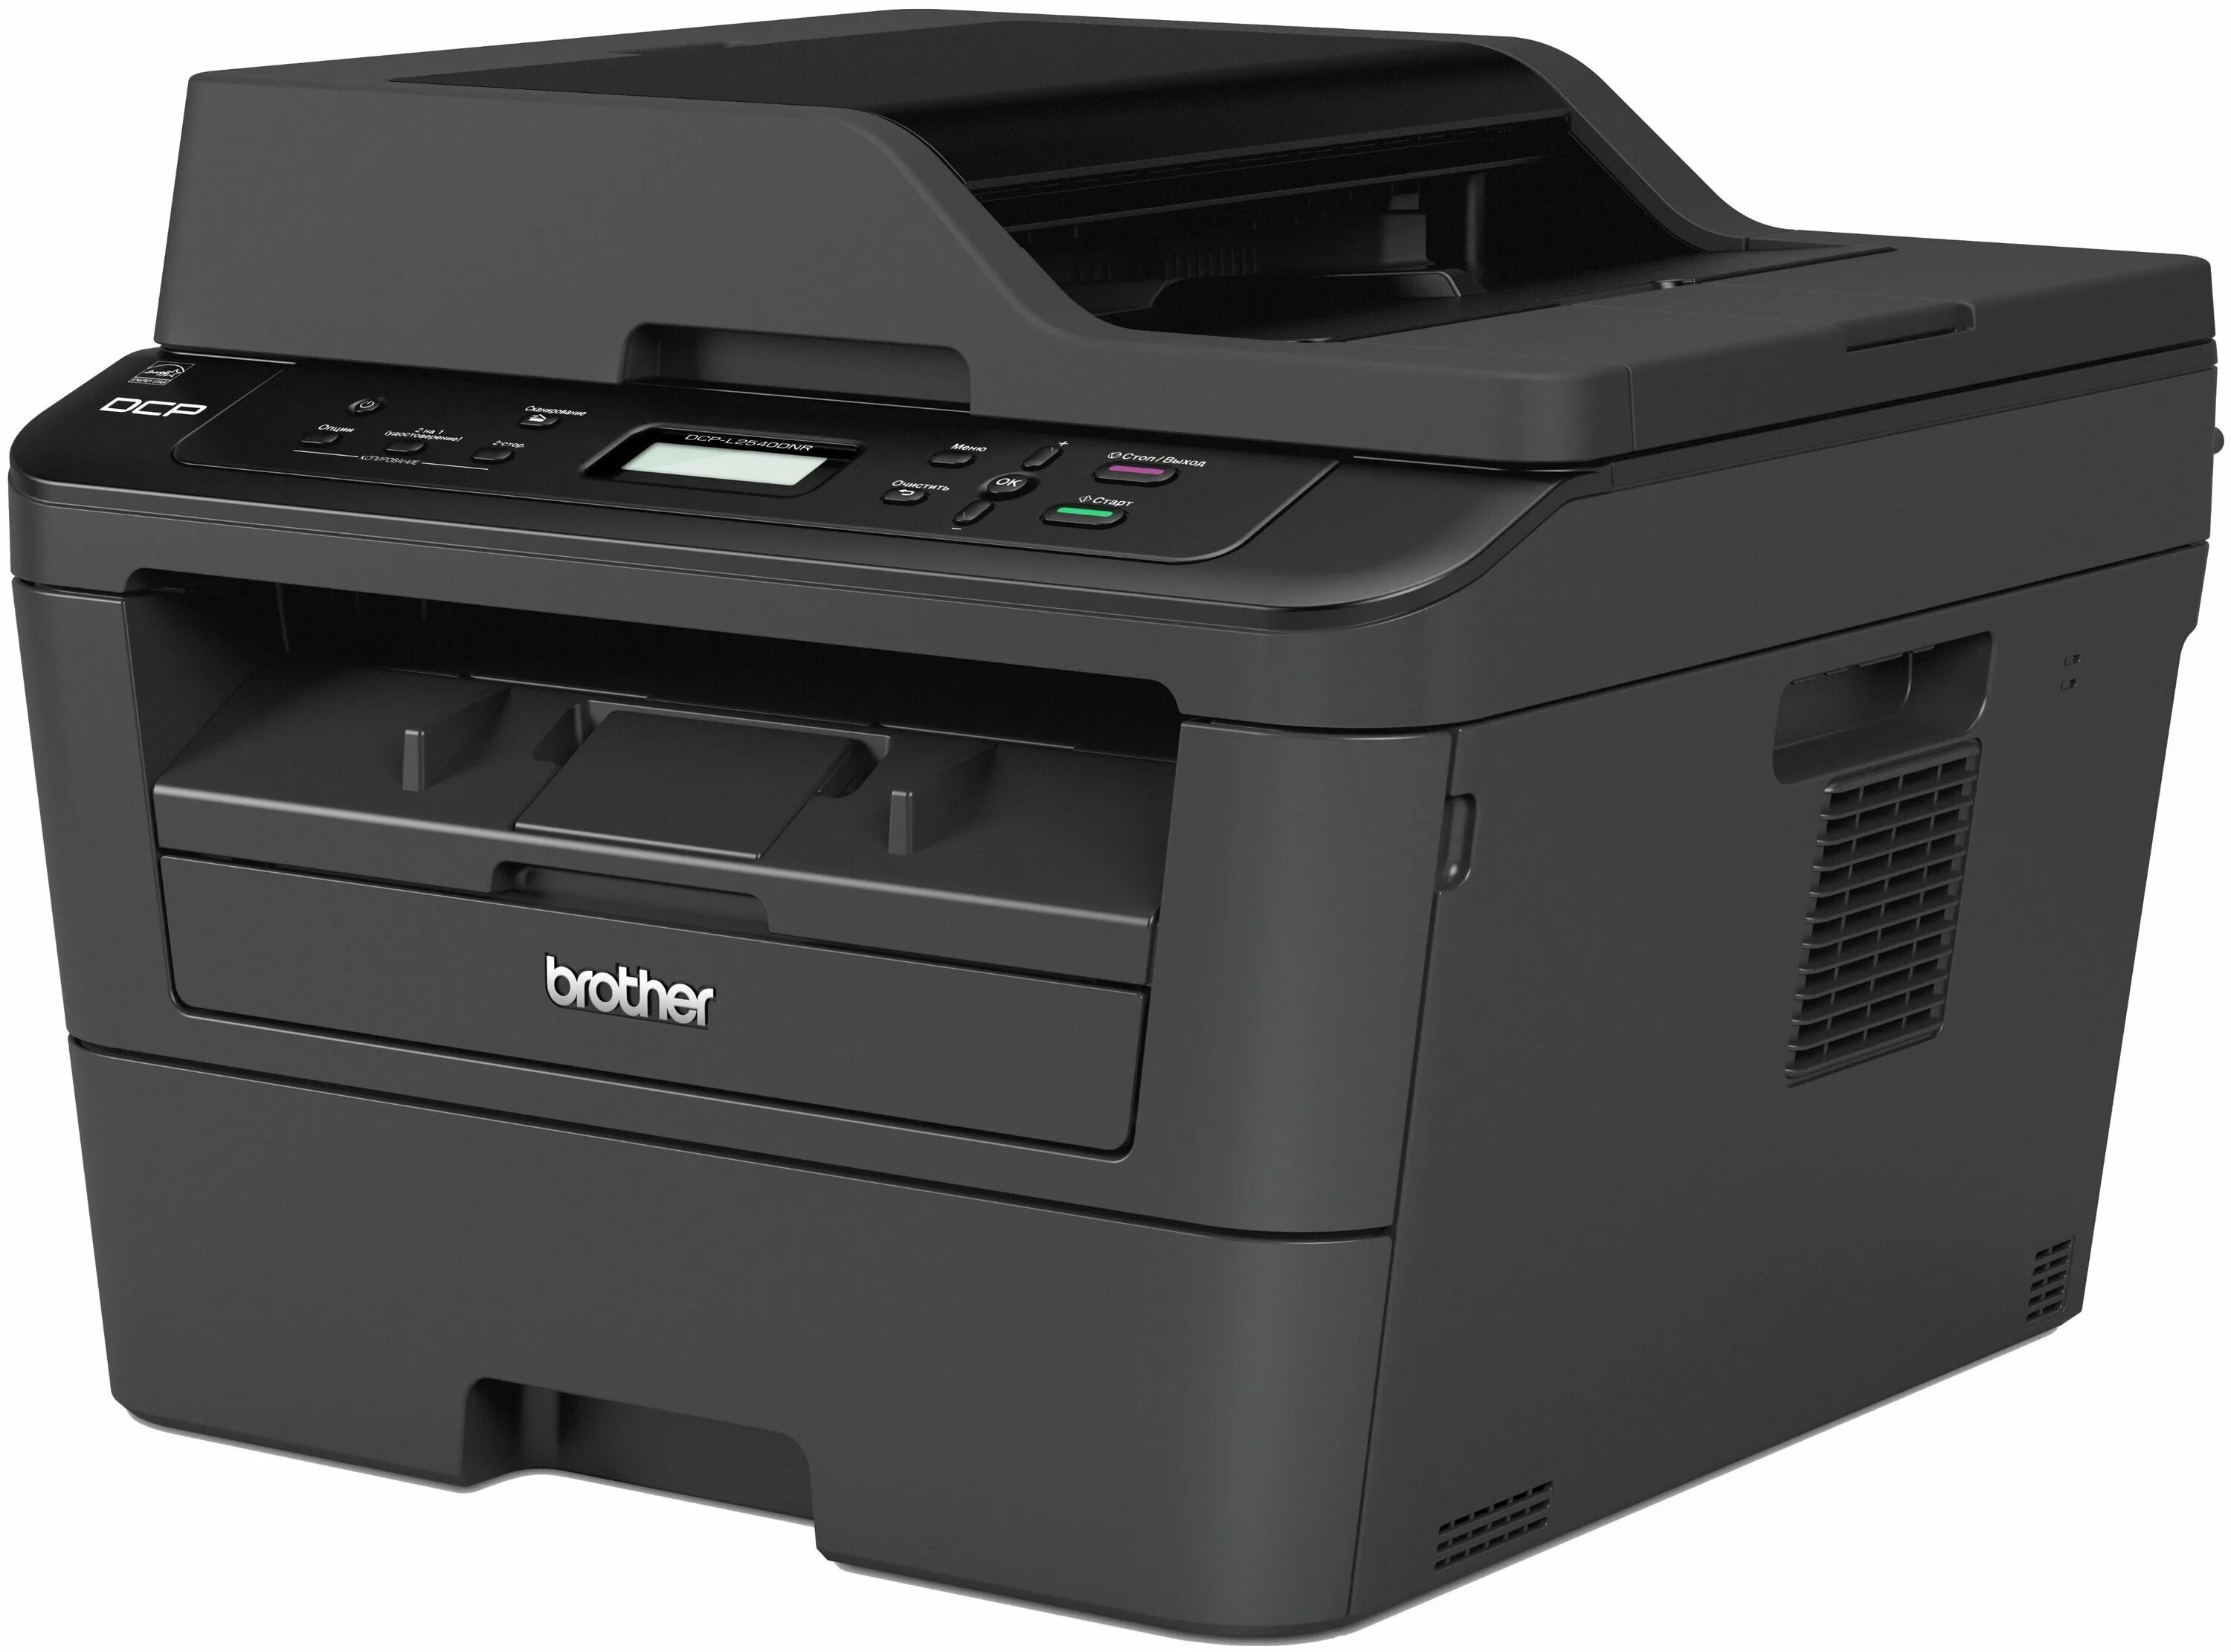 Brother l2500. Brother DCP-l2520dwr. МФУ brother DCP-l2500dr. МФУ лазерное brother DCP-l2520dwr. МФУ brother MFC-l2720dwr.